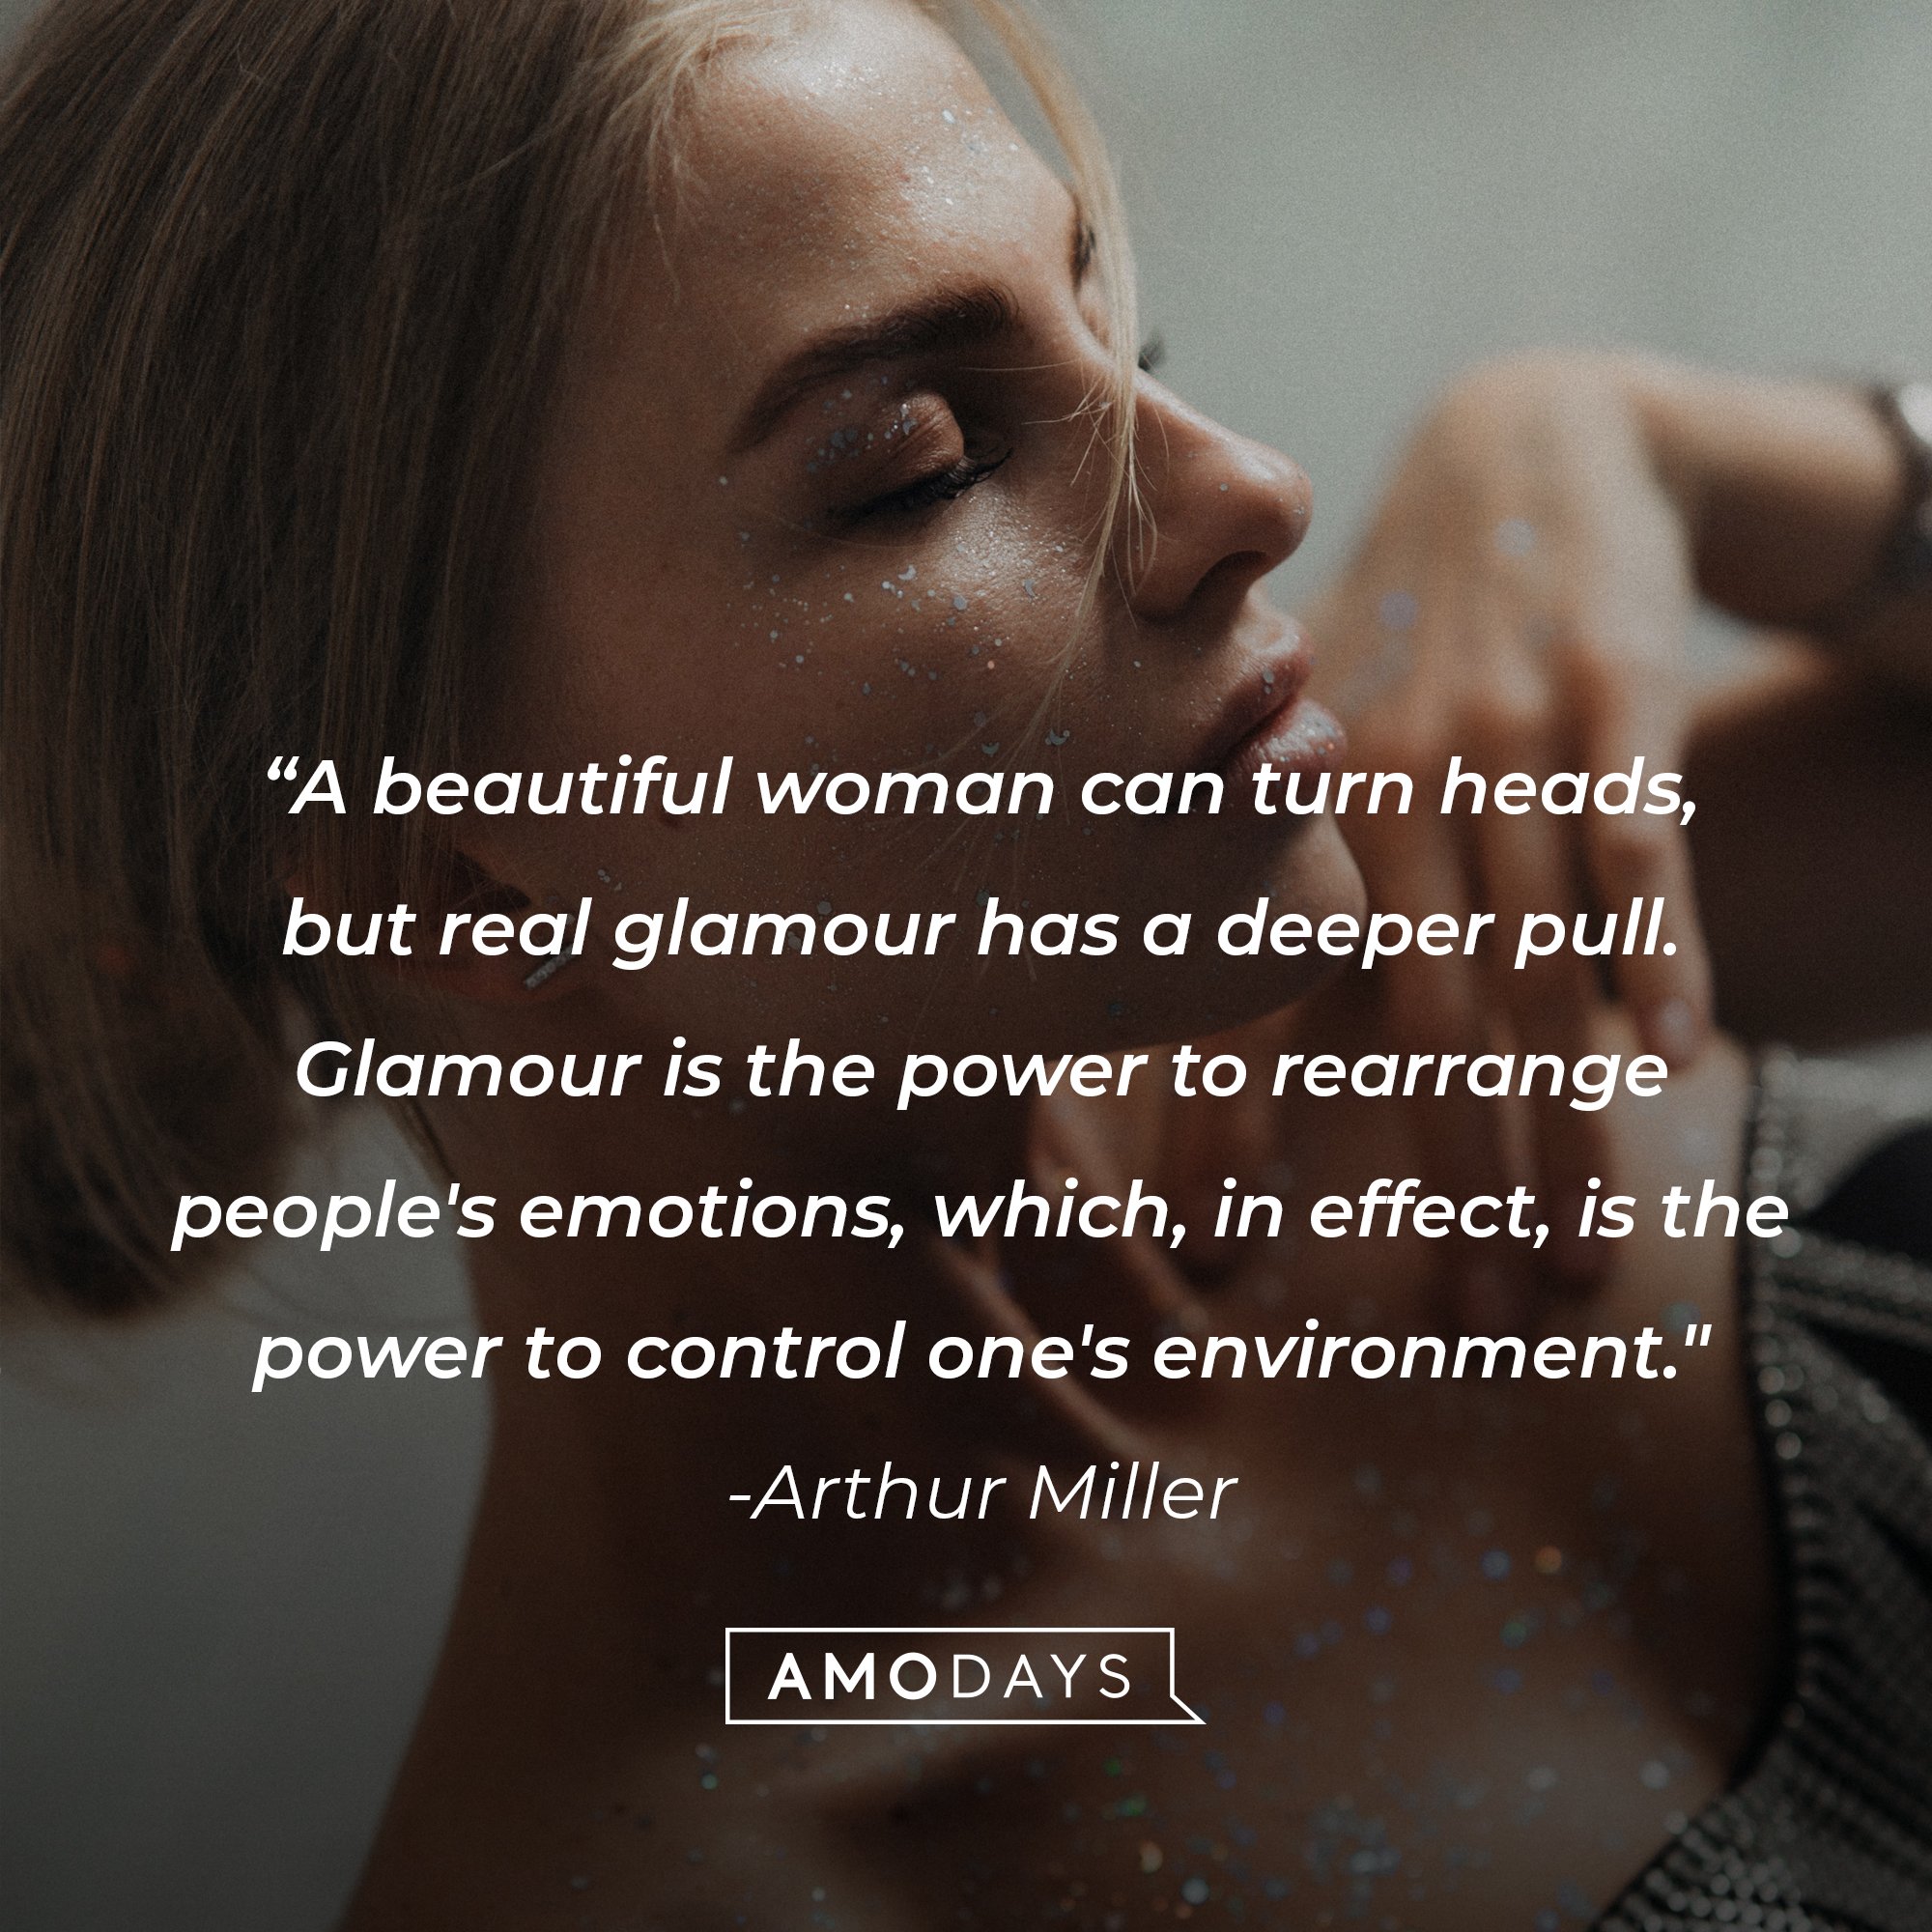 Arthur Miller’s quote: "A beautiful woman can turn heads, but real glamour has a deeper pull. Glamour is the power to rearrange people's emotions, which, in effect, is the power to control one's environment." | Image: AmoDays